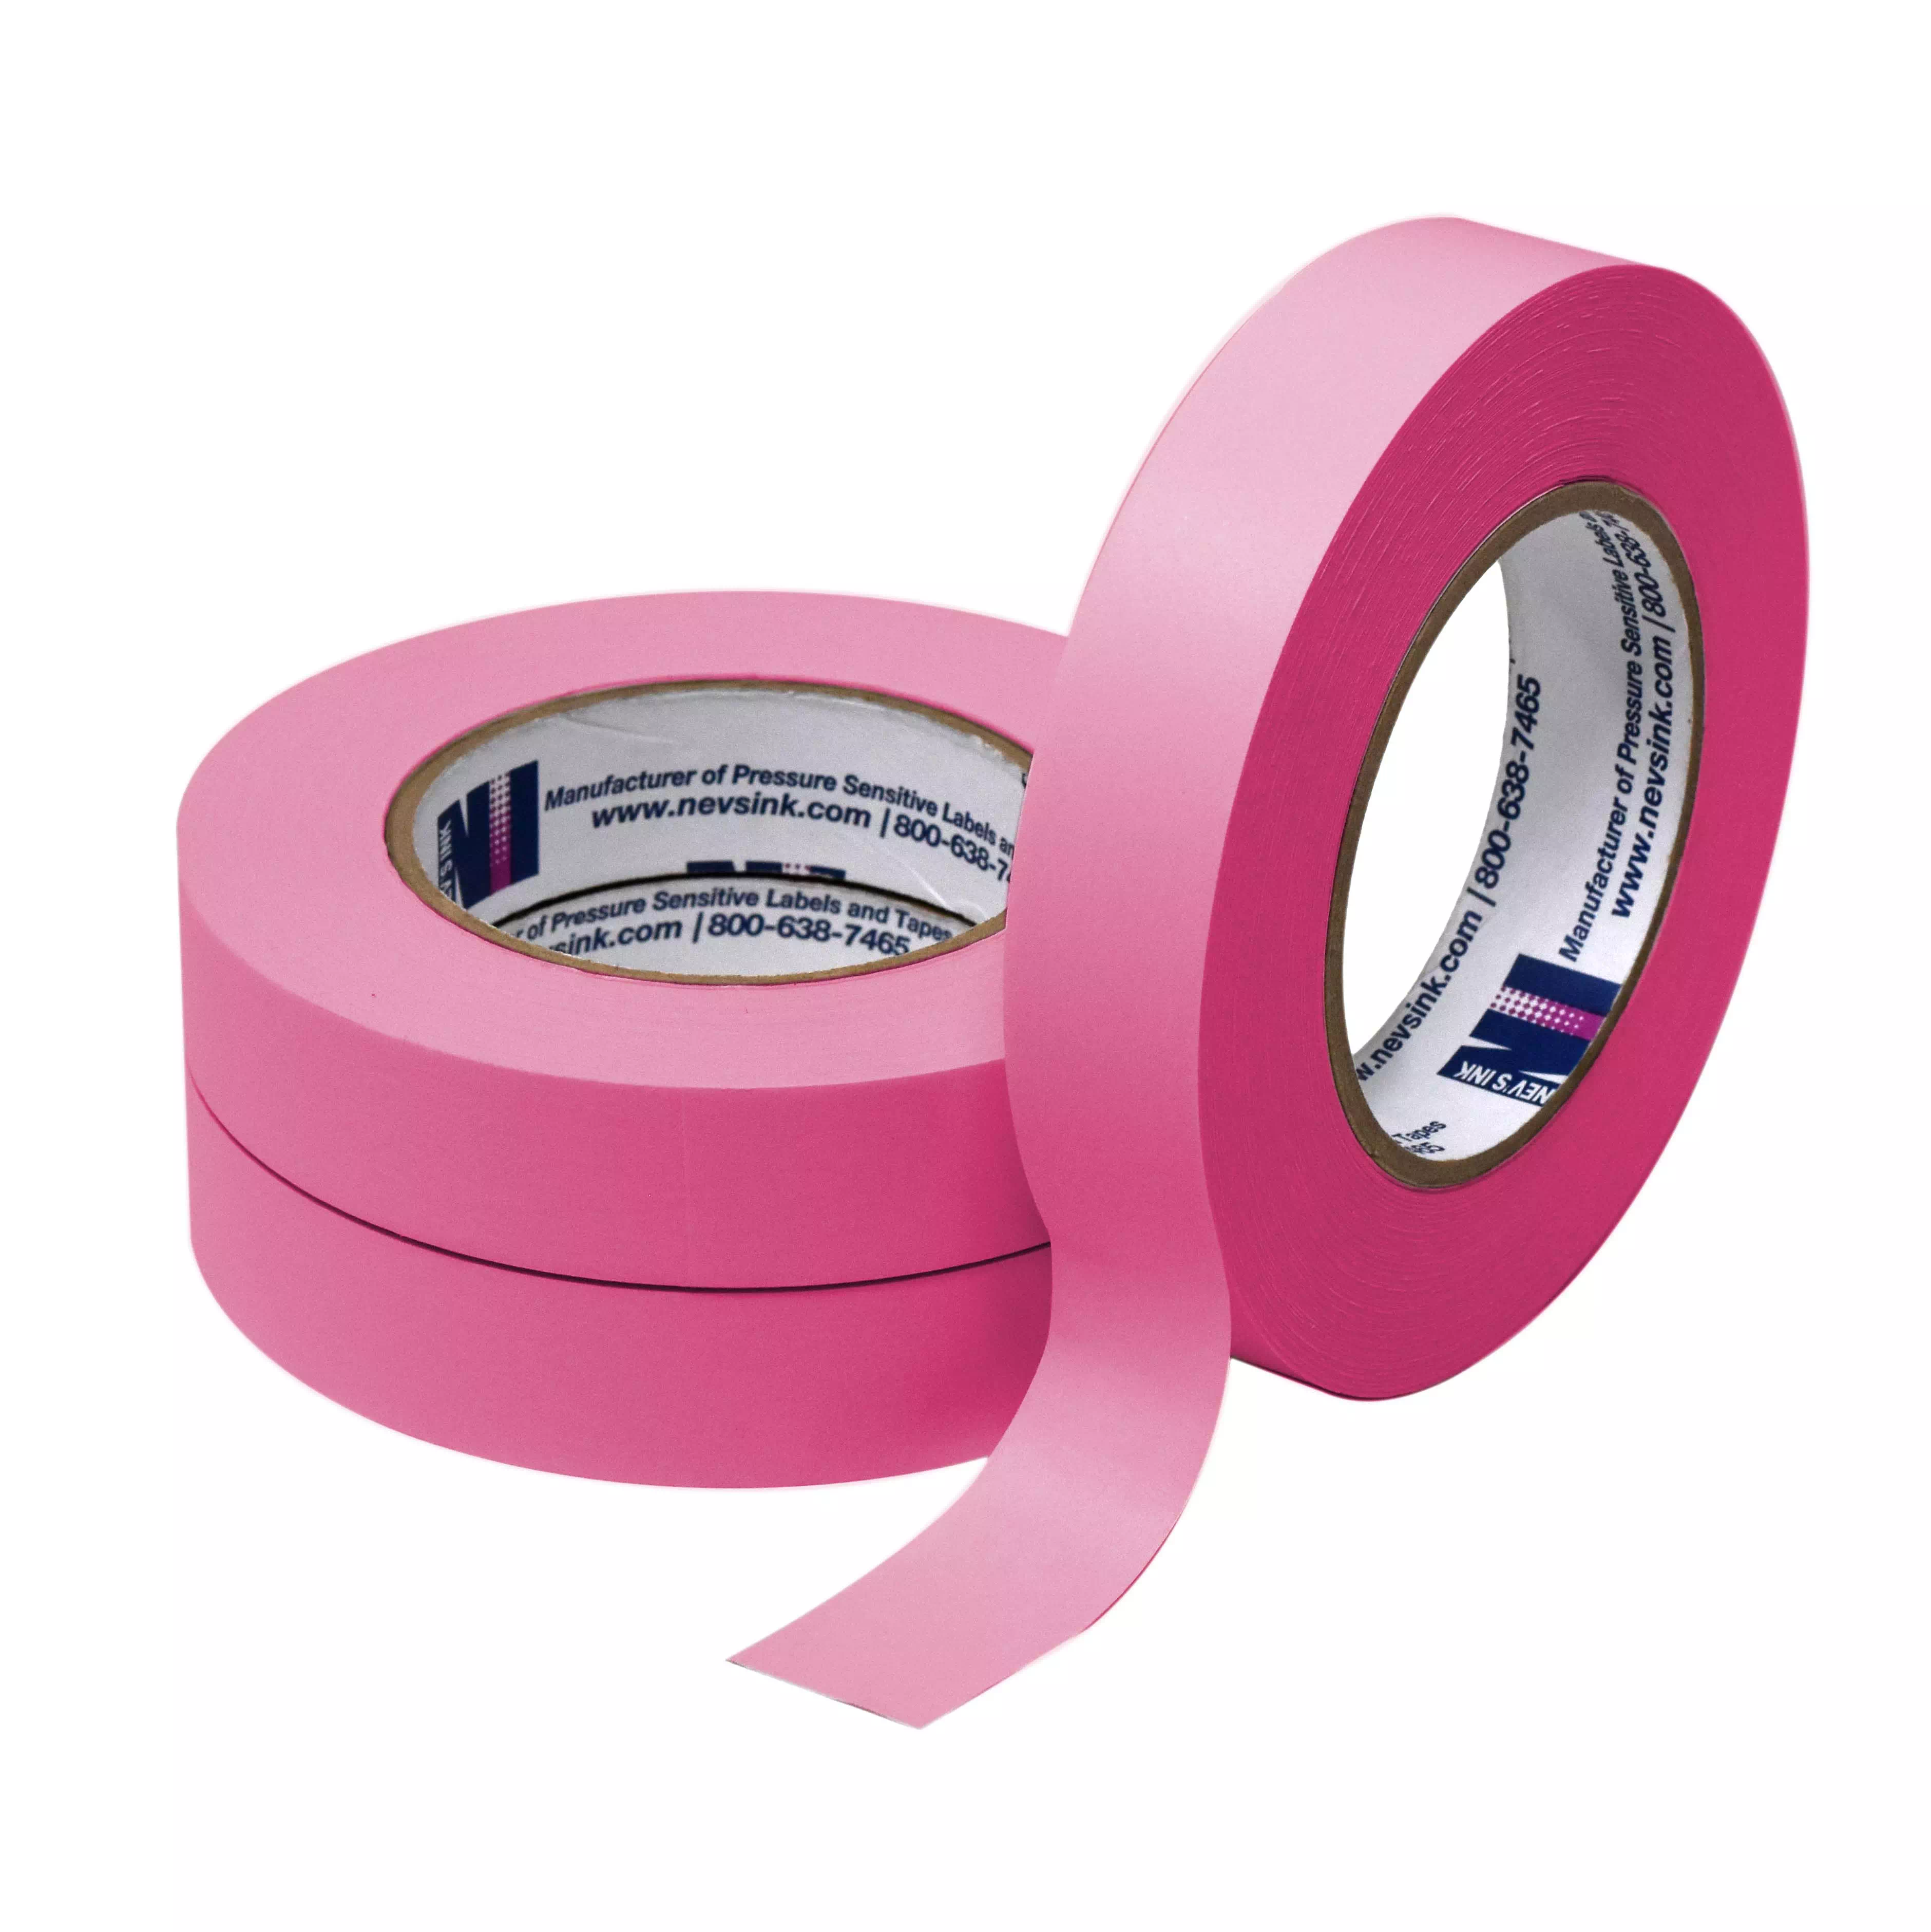 1" wide x 60yd Rose Labeling Tape